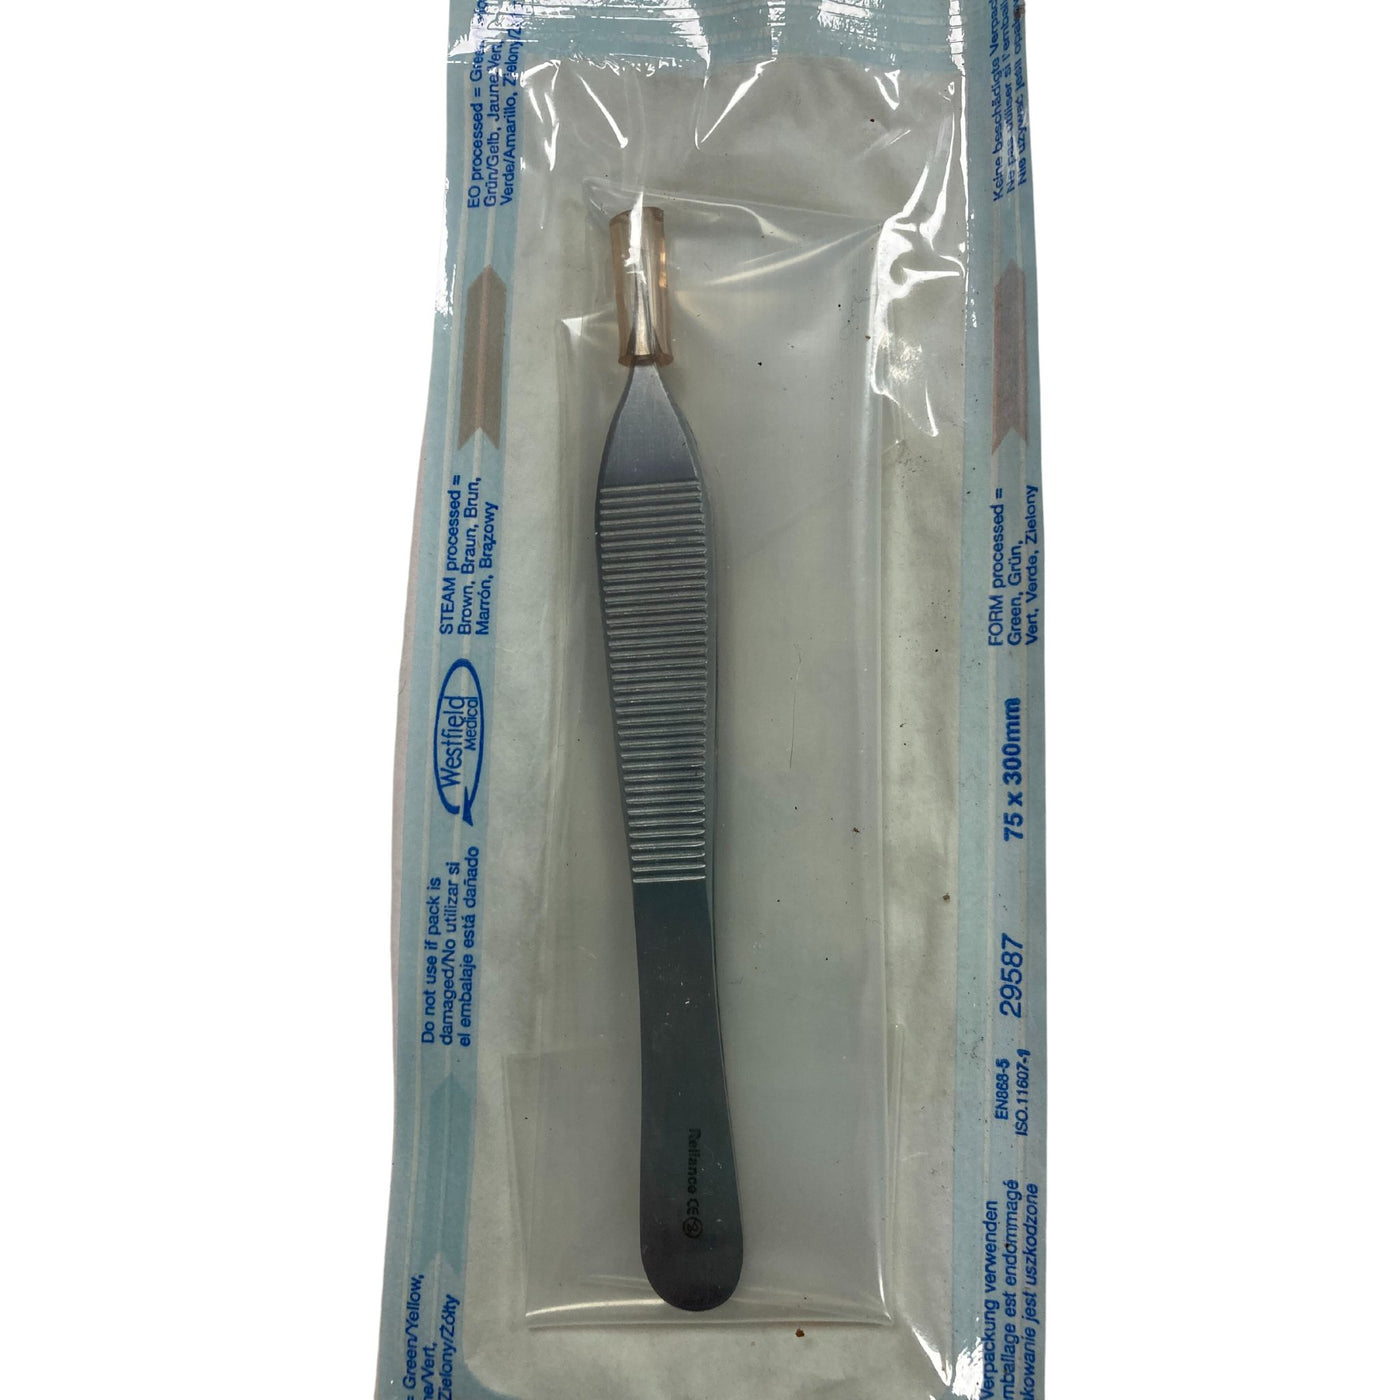 CLEARANCE - Adson Fine Toothed Foceps in sterile packge